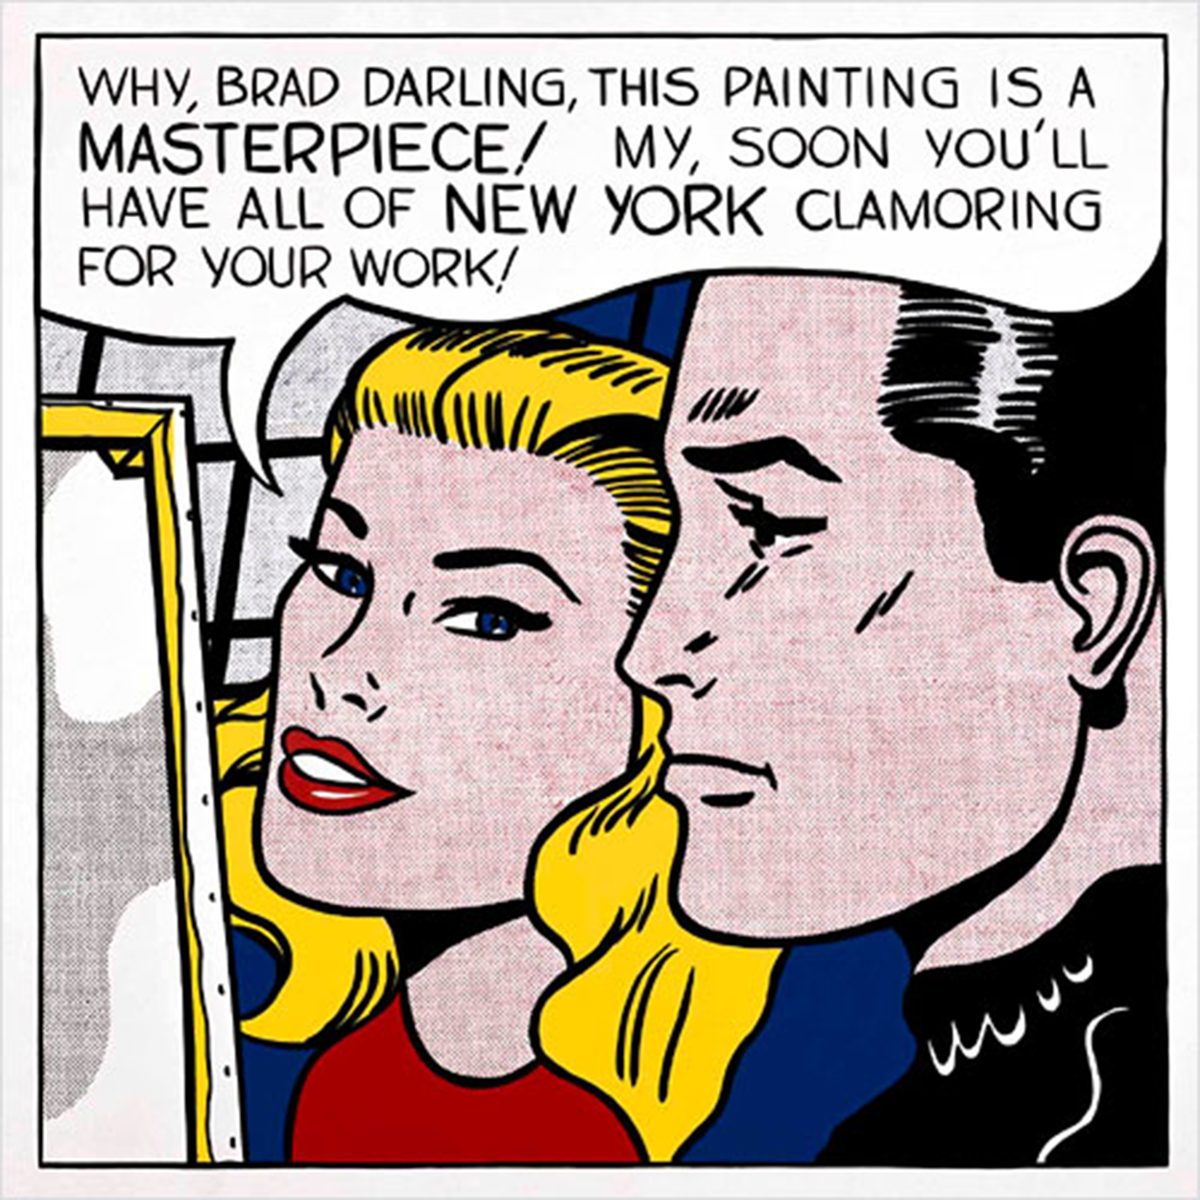 A painting featuring comic book style characters, one is a blond woman the other is a man with dark hair. The woman has a speech bubble above her: this painting is a masterpiece.